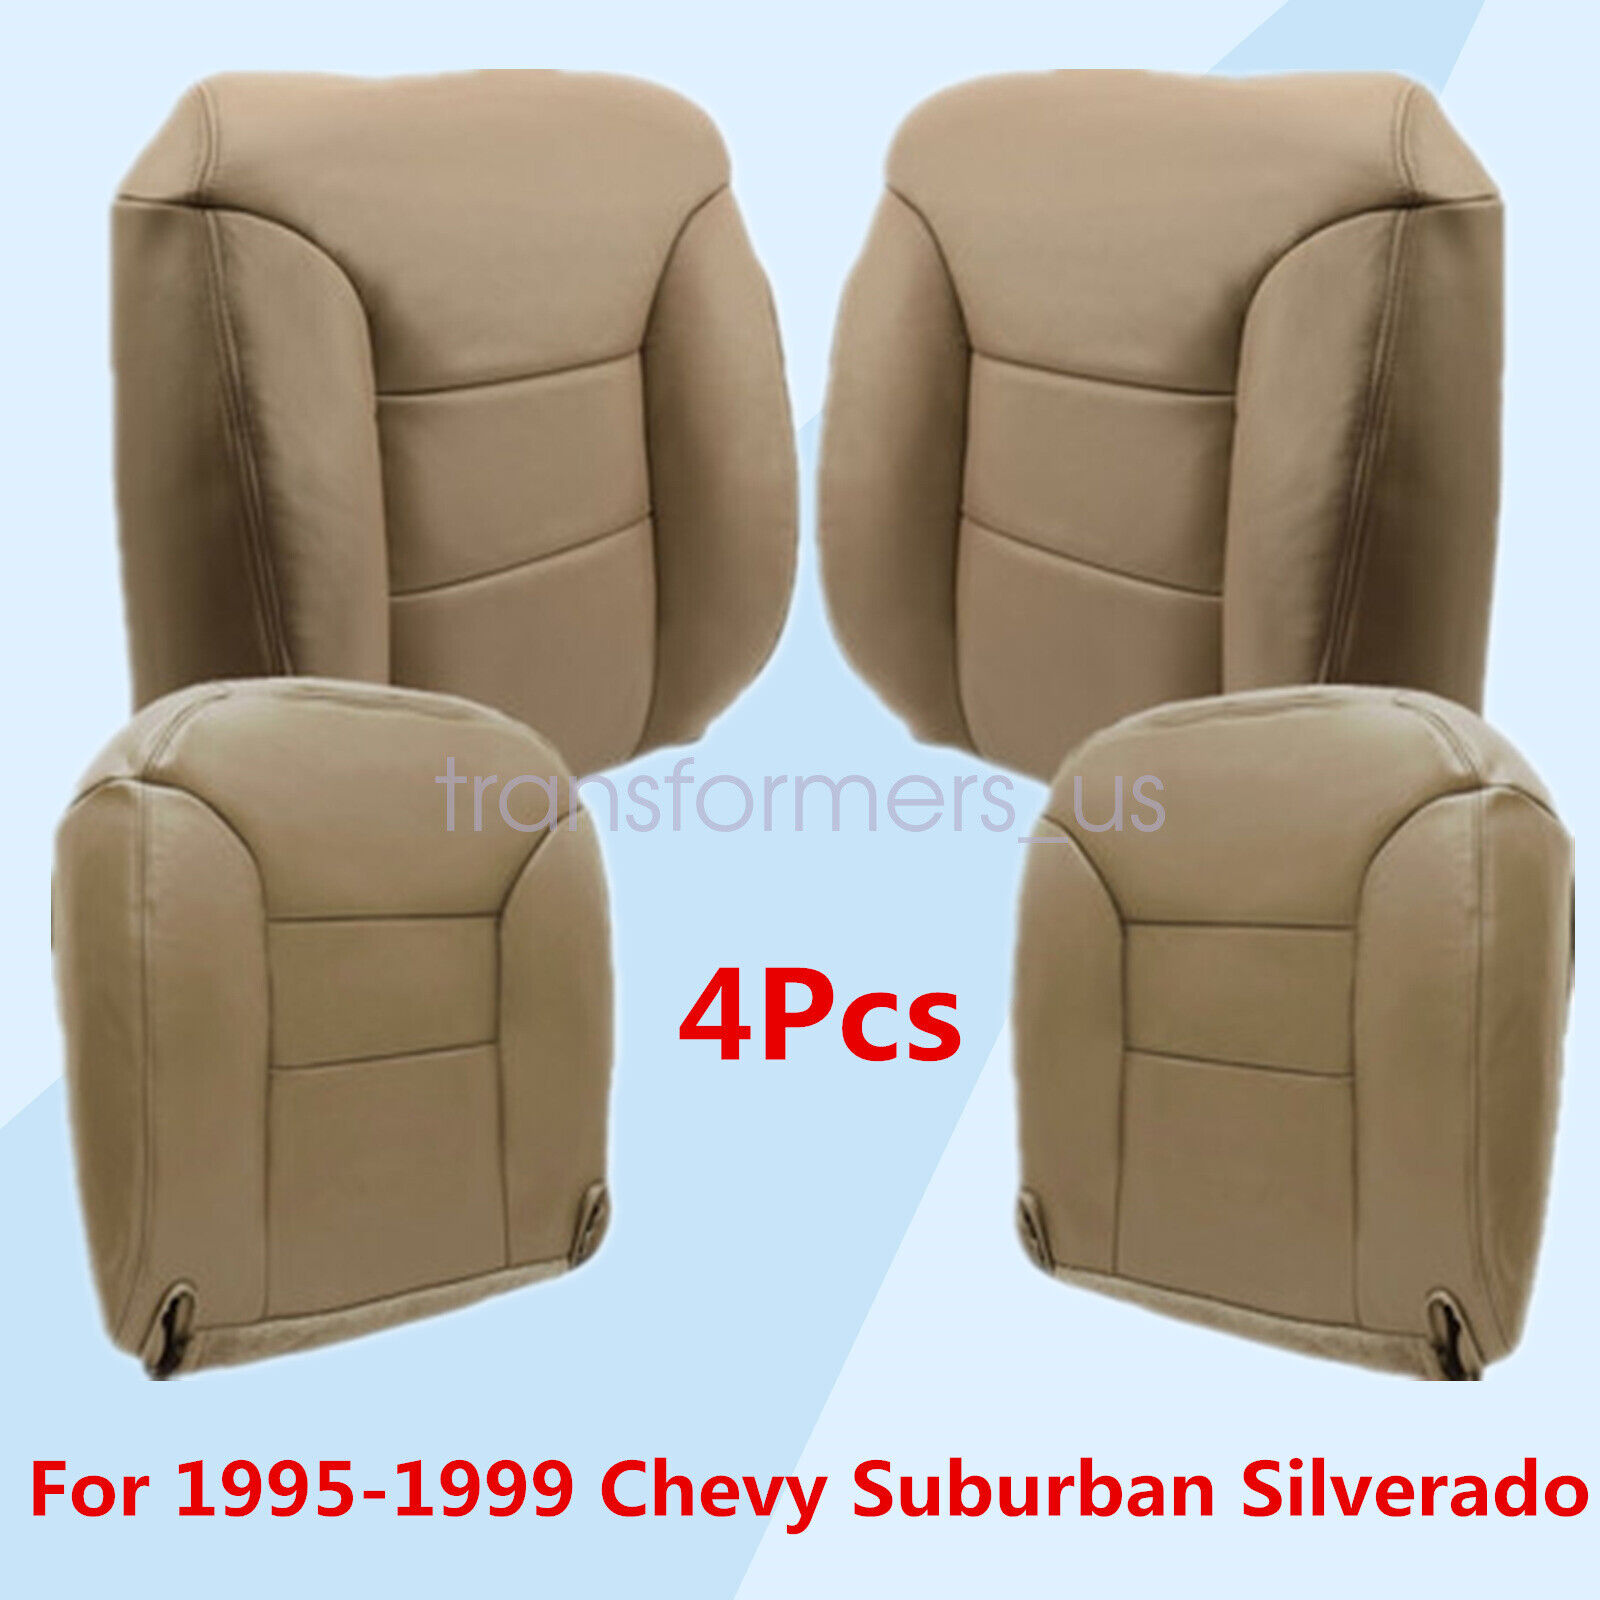 For 1995-1999 Chevy Tahoe Suburban Front Bottom Top Leather Seat Cover Tan